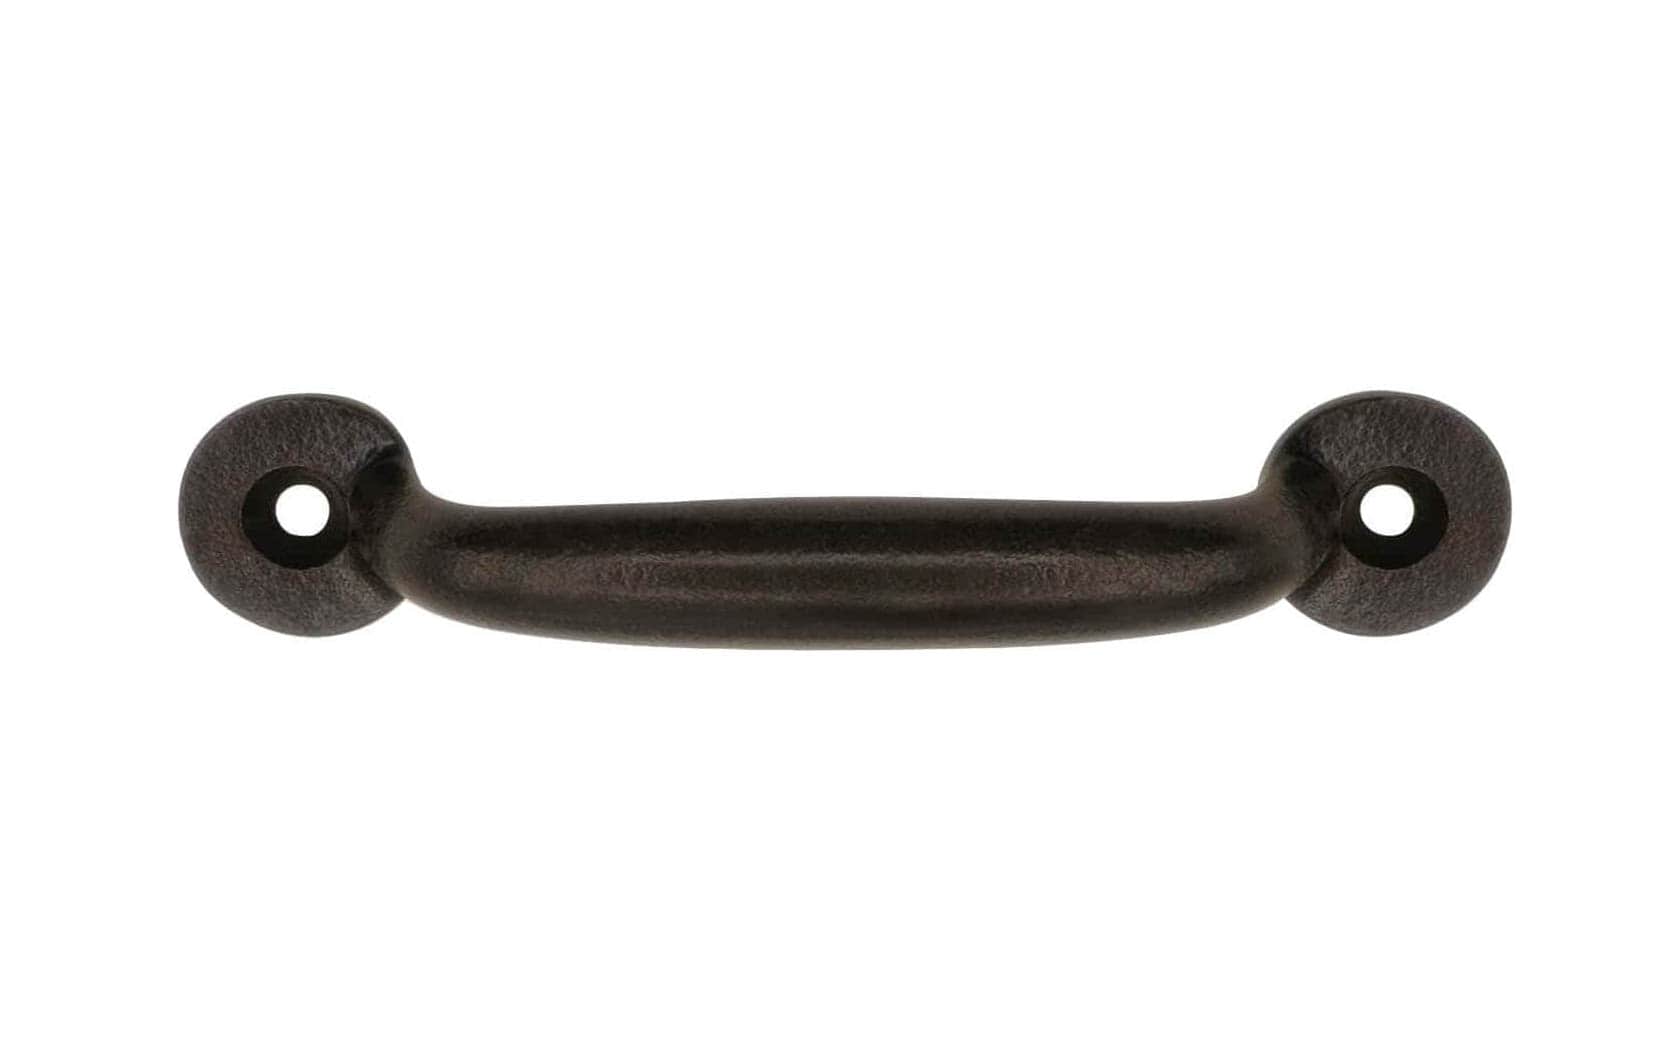 A Classic Cast Iron Handle ~ 3" On Centers with a satin black finish. Excellent for a wide variety of uses including drawers, cabinets, smaller doors, sashes, furniture, & screen doors. A classic looking handle excellent for adding charm & style to your home. Vintage finish with lacquer to resist rust. Model 88609